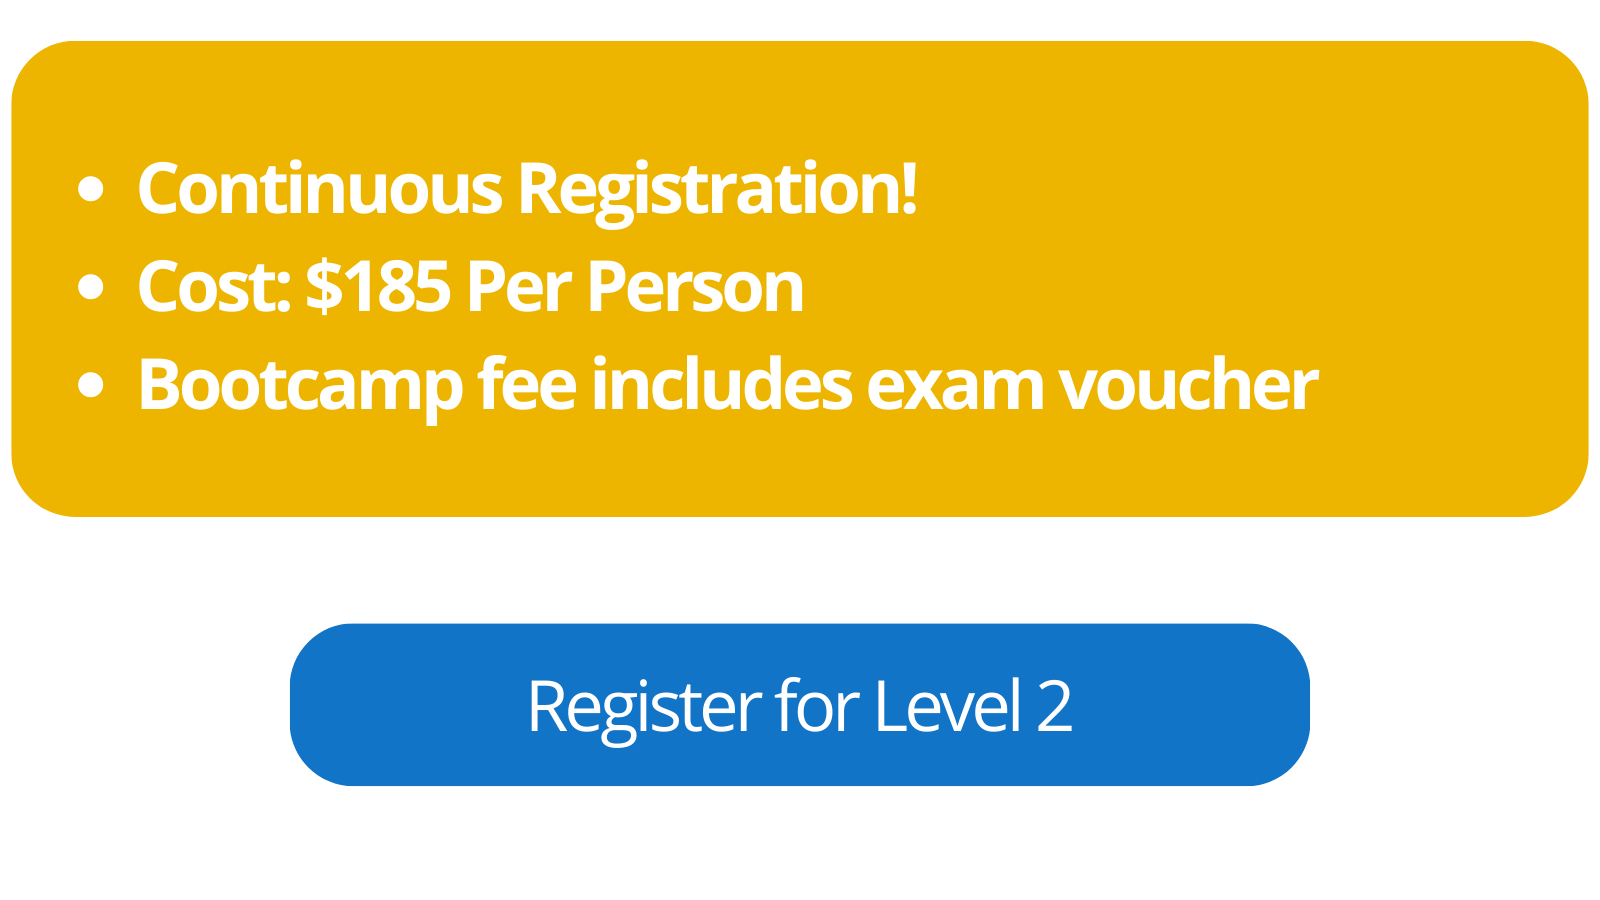 Continuous Registration! Cost $165 Per Person Bootcamp fee includes exam voucher (8)